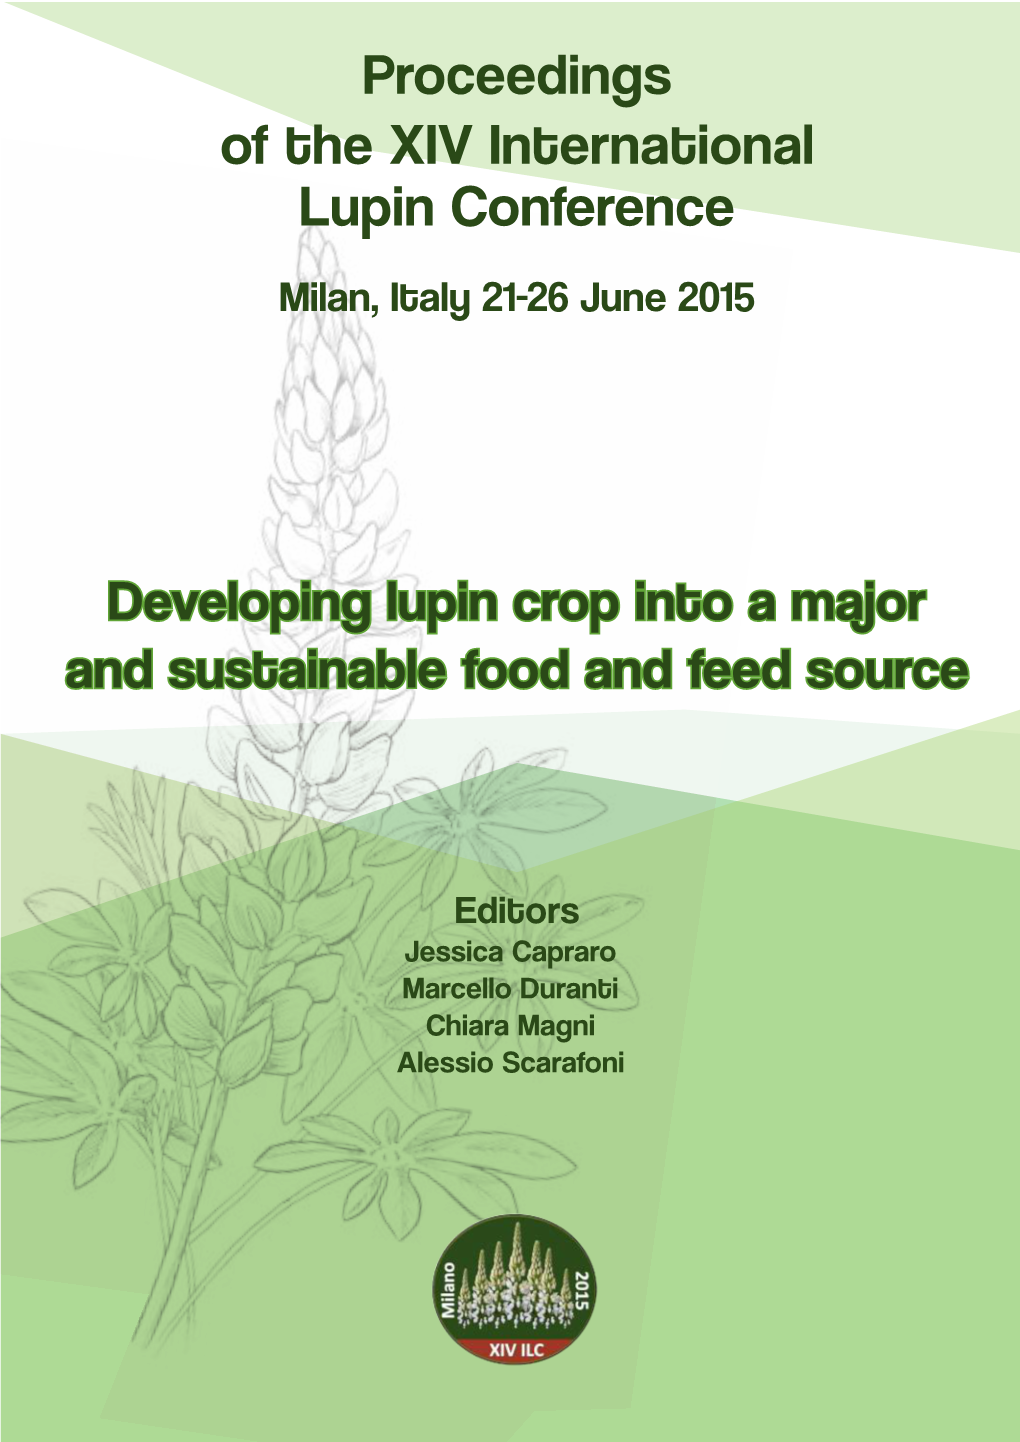 Proceedings of the XIV International Lupin Conference Milan, Italy 21-26 June 2015